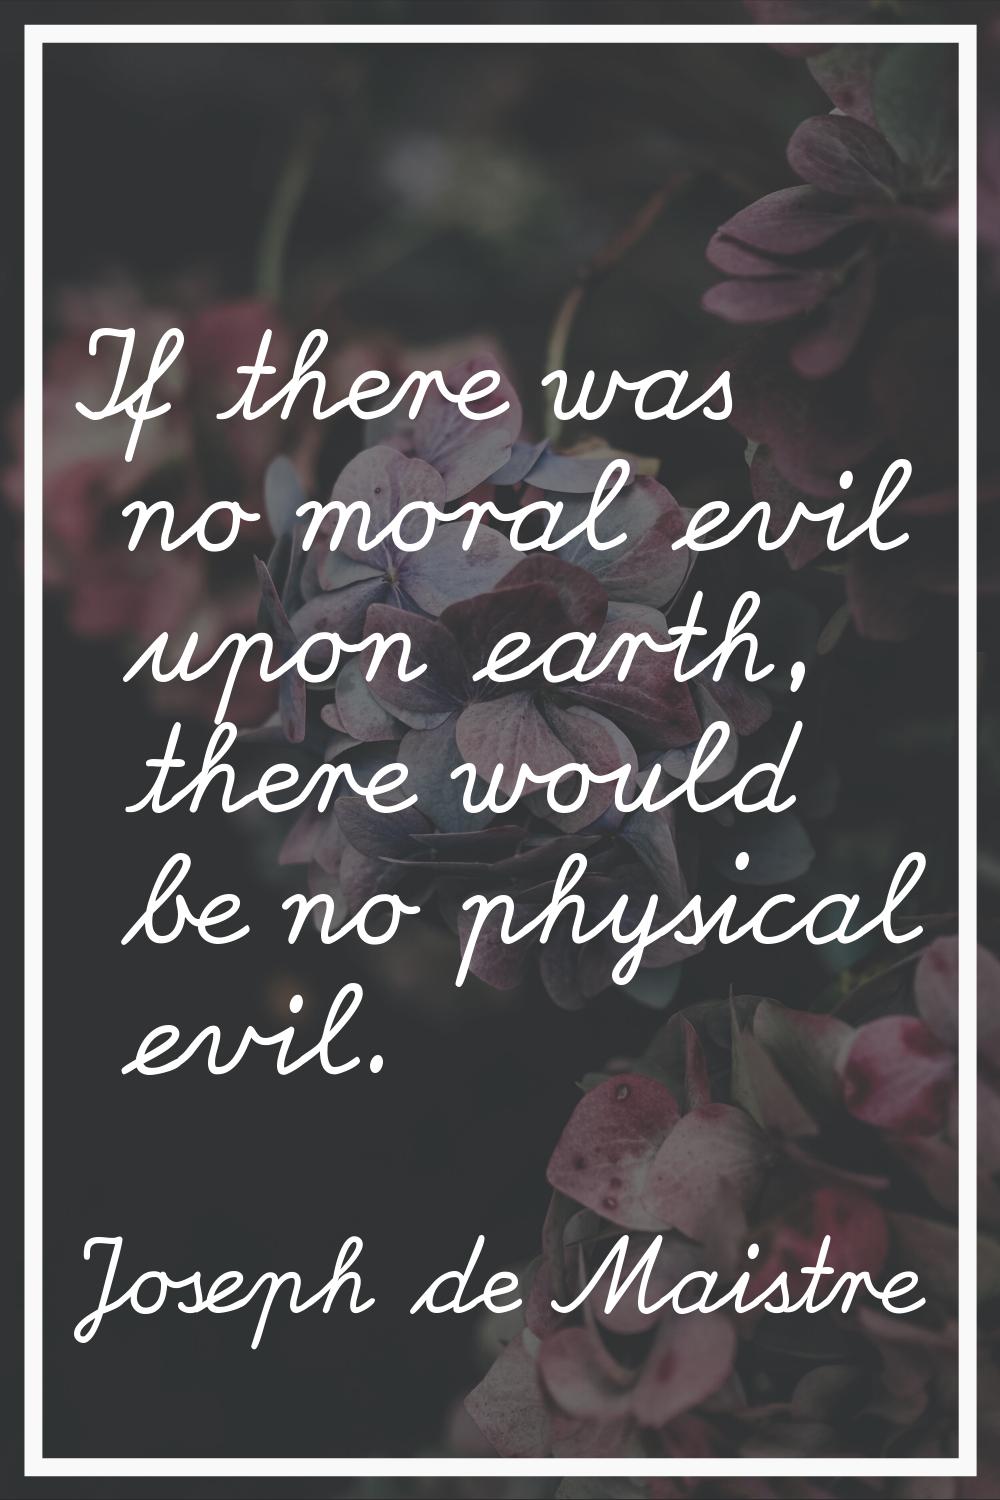 If there was no moral evil upon earth, there would be no physical evil.